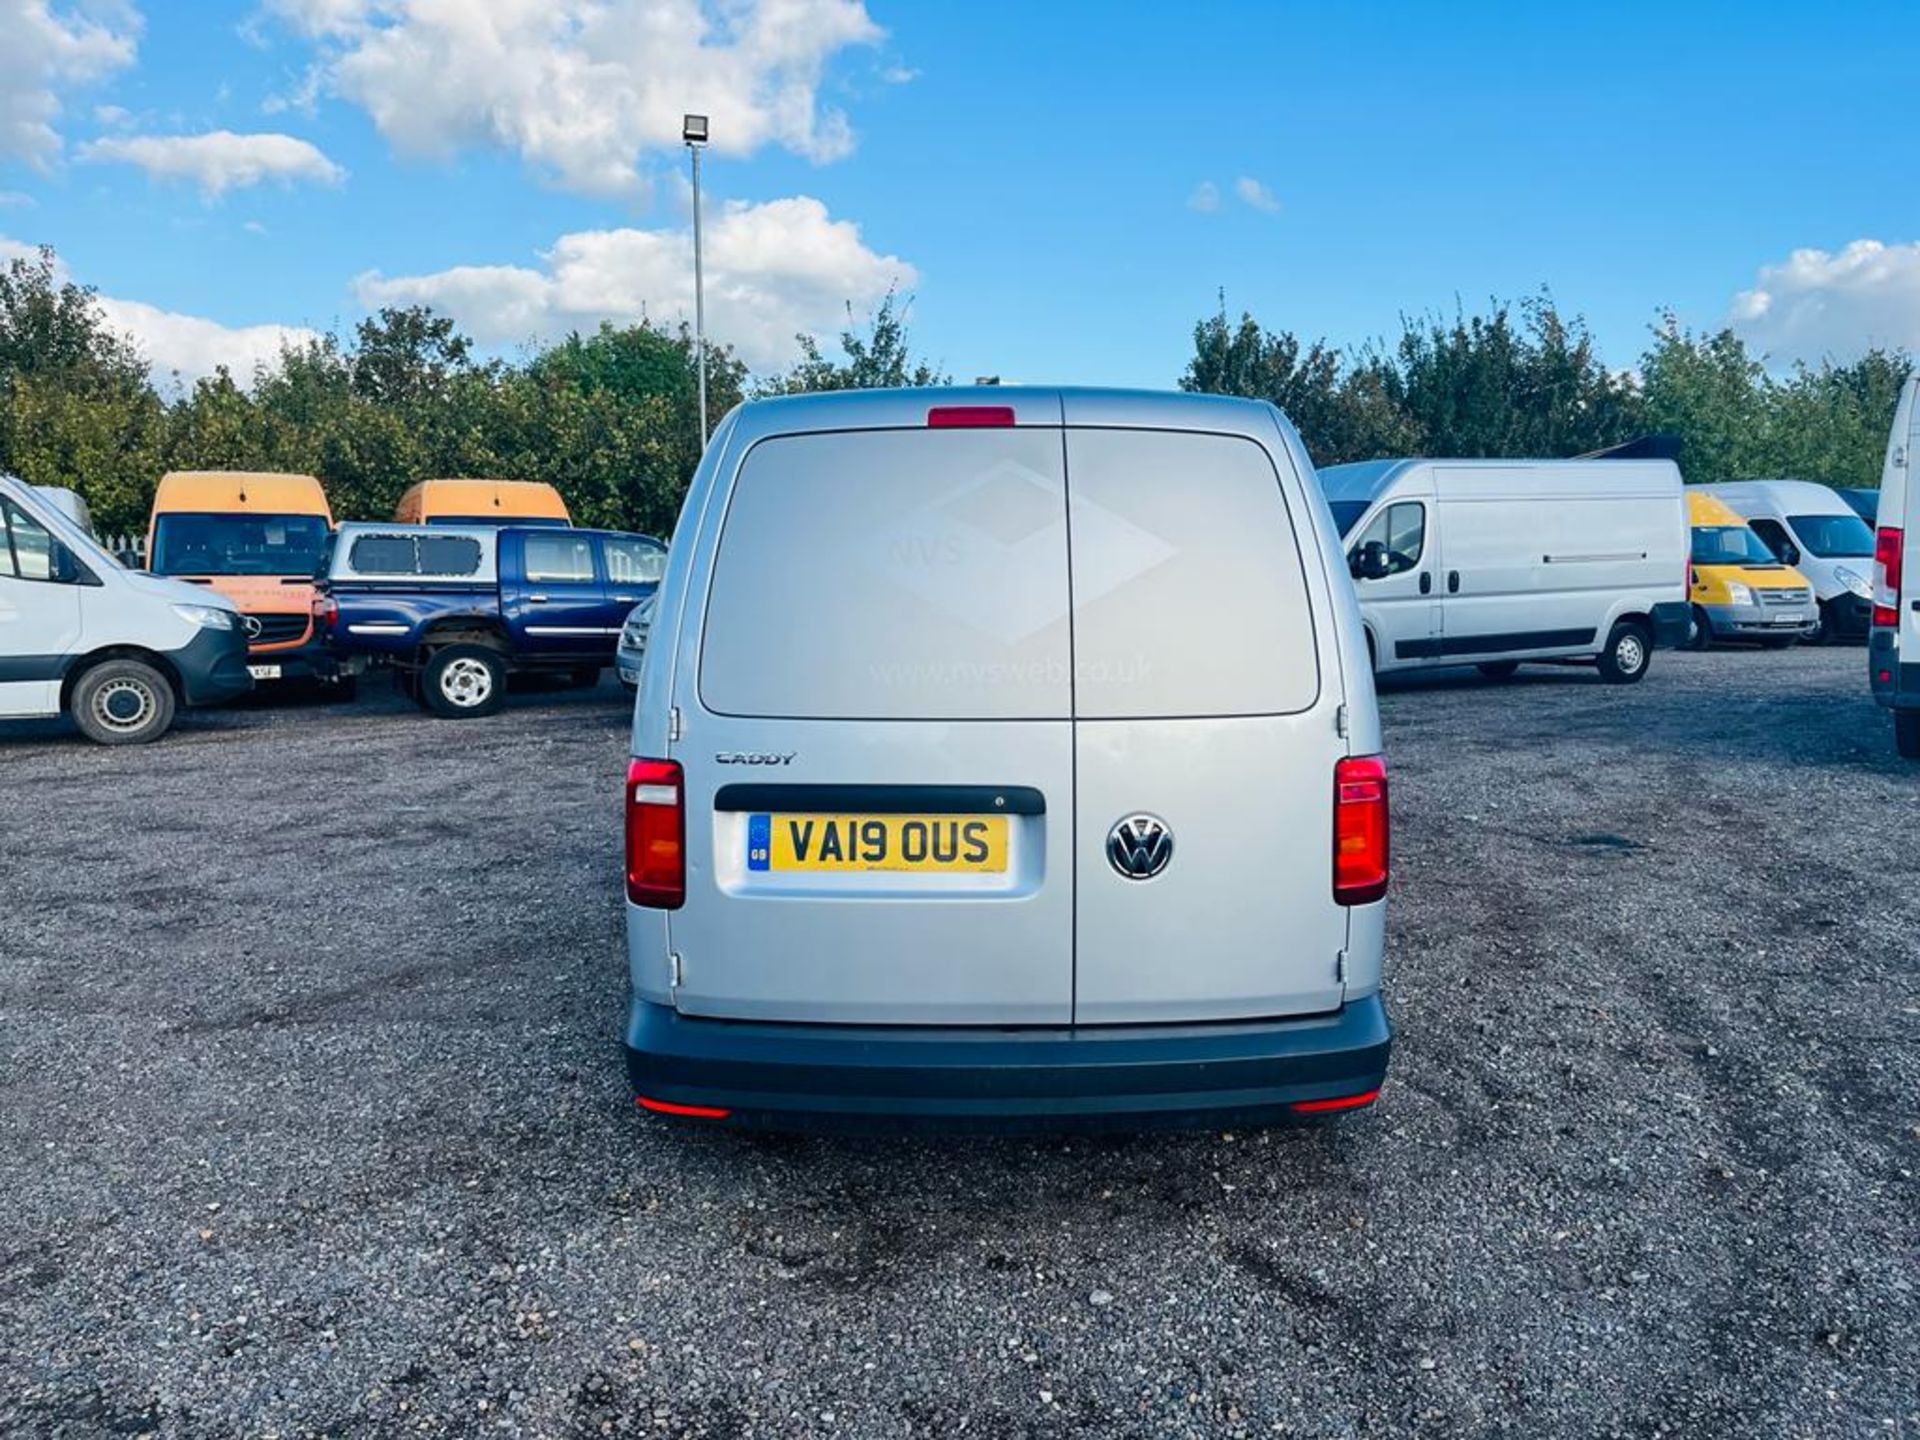 ** ON SALE ** Volkswagen Caddy Maxi C20 2.0 TDI 102 BMT Startline Automatic 2019 '19 Reg' - A/C - Image 9 of 30